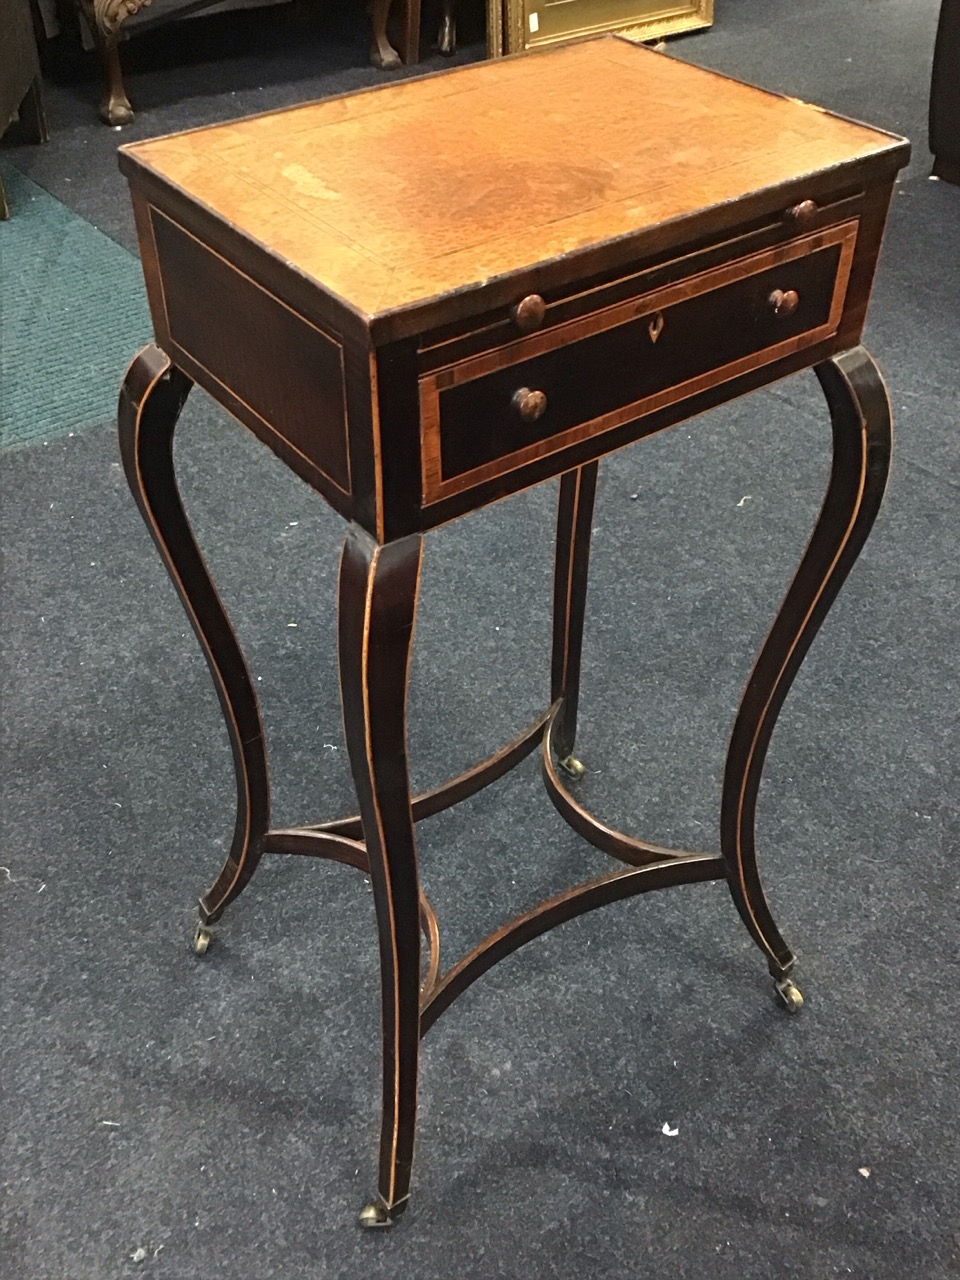 A C18th rectangular mahogany occasional table with kingwood banded partridge wood top above a - Image 3 of 3